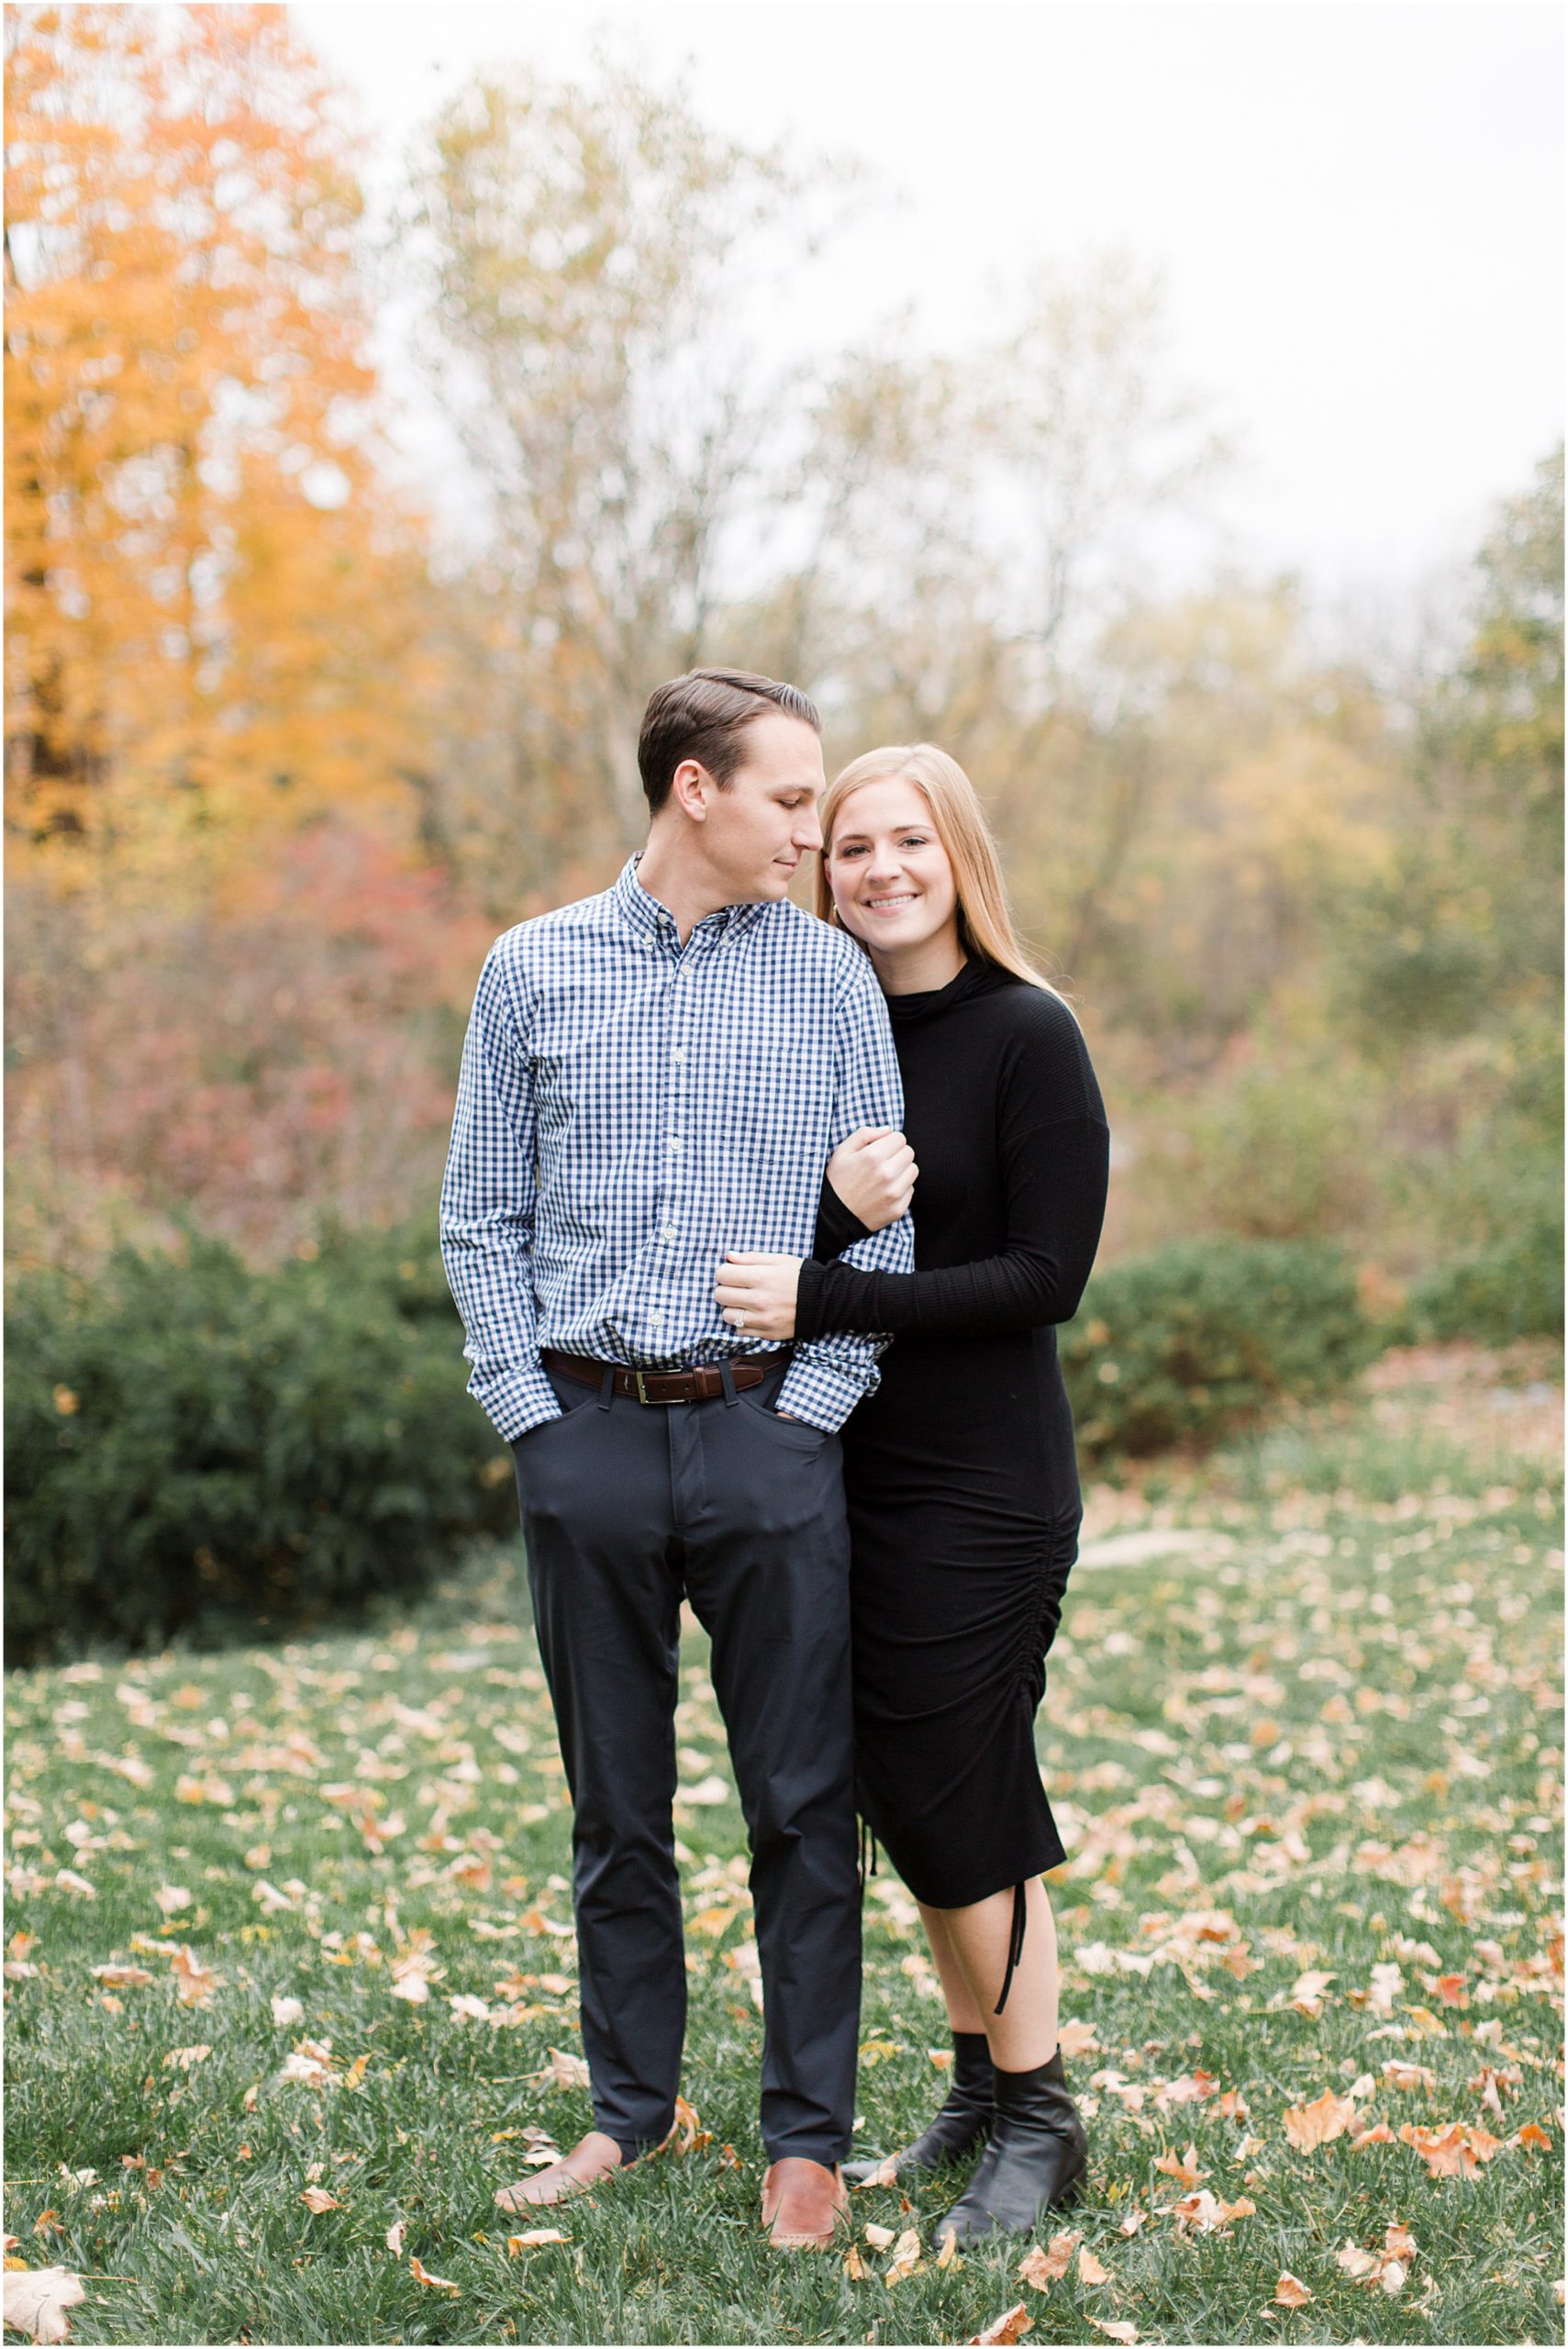 Autumn Newfields Engagement Session_0009.jpg